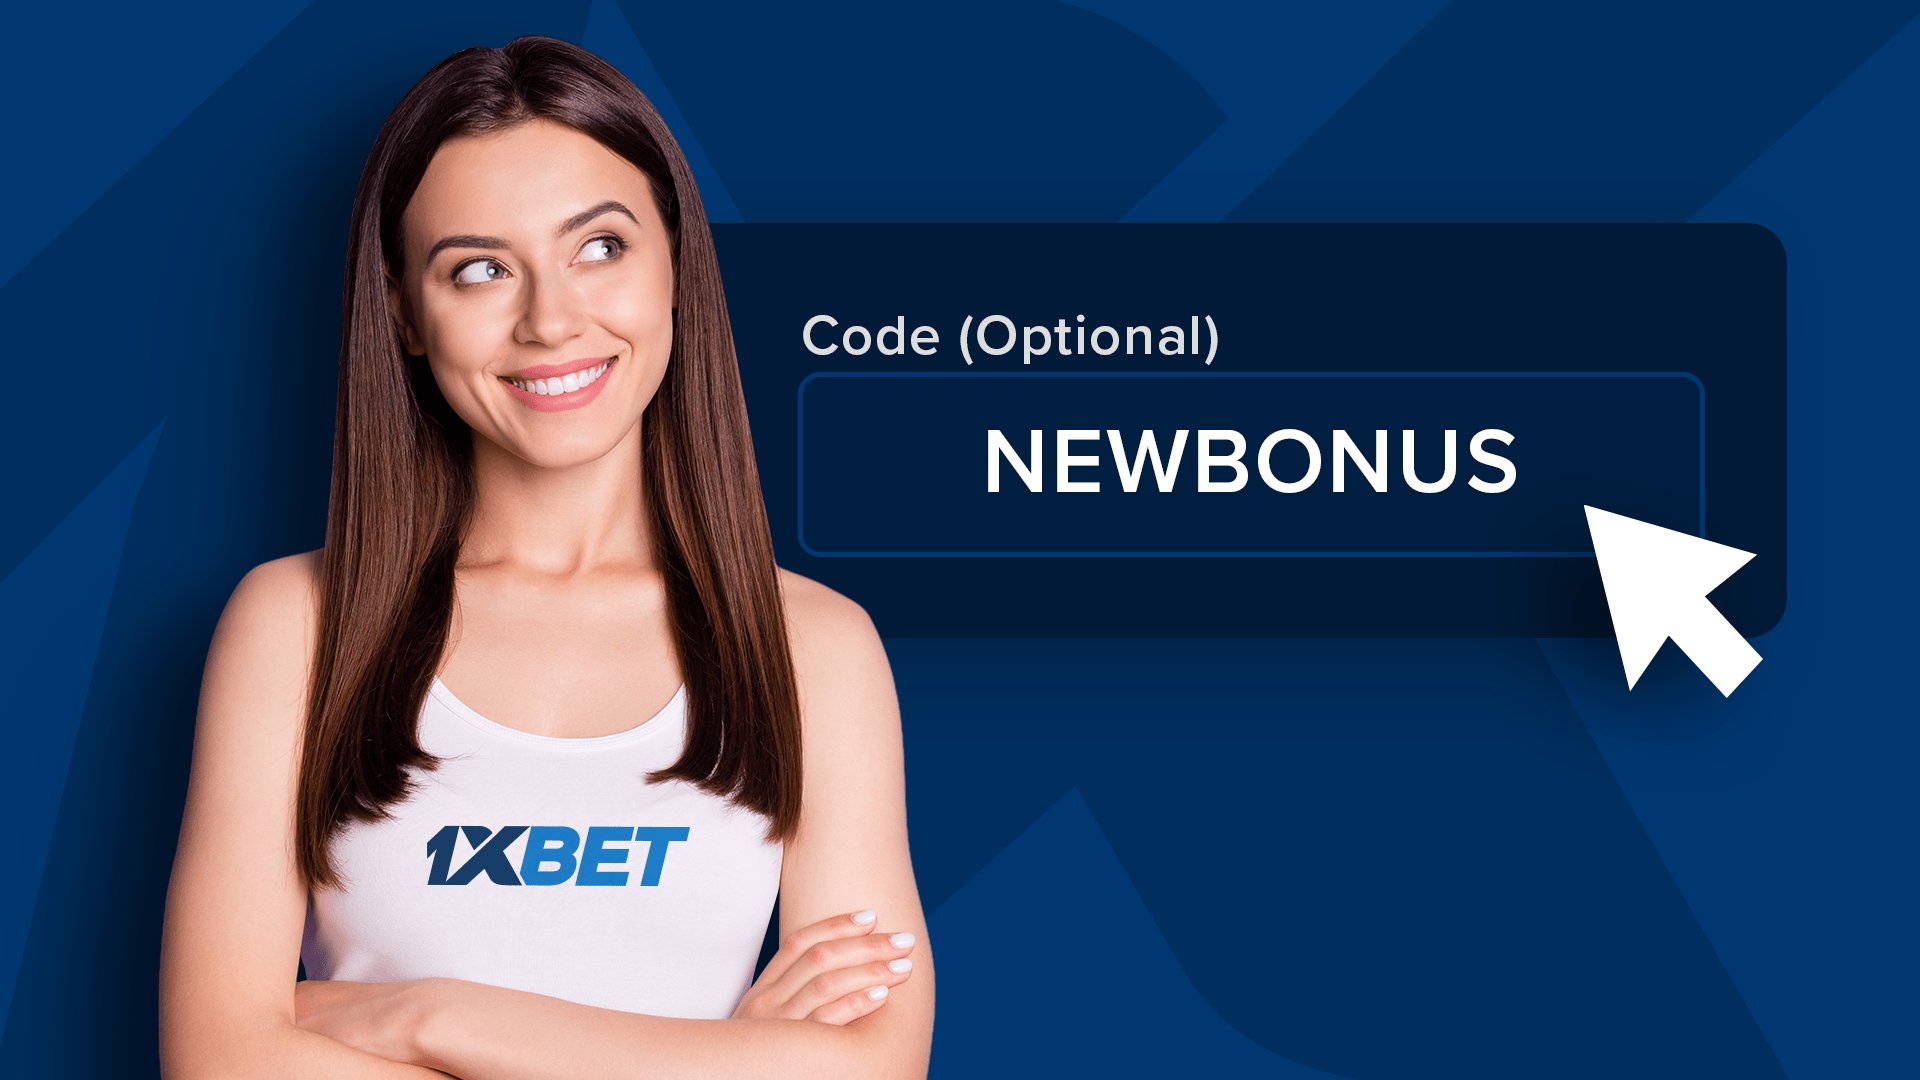 How to use the 1xBet promo code